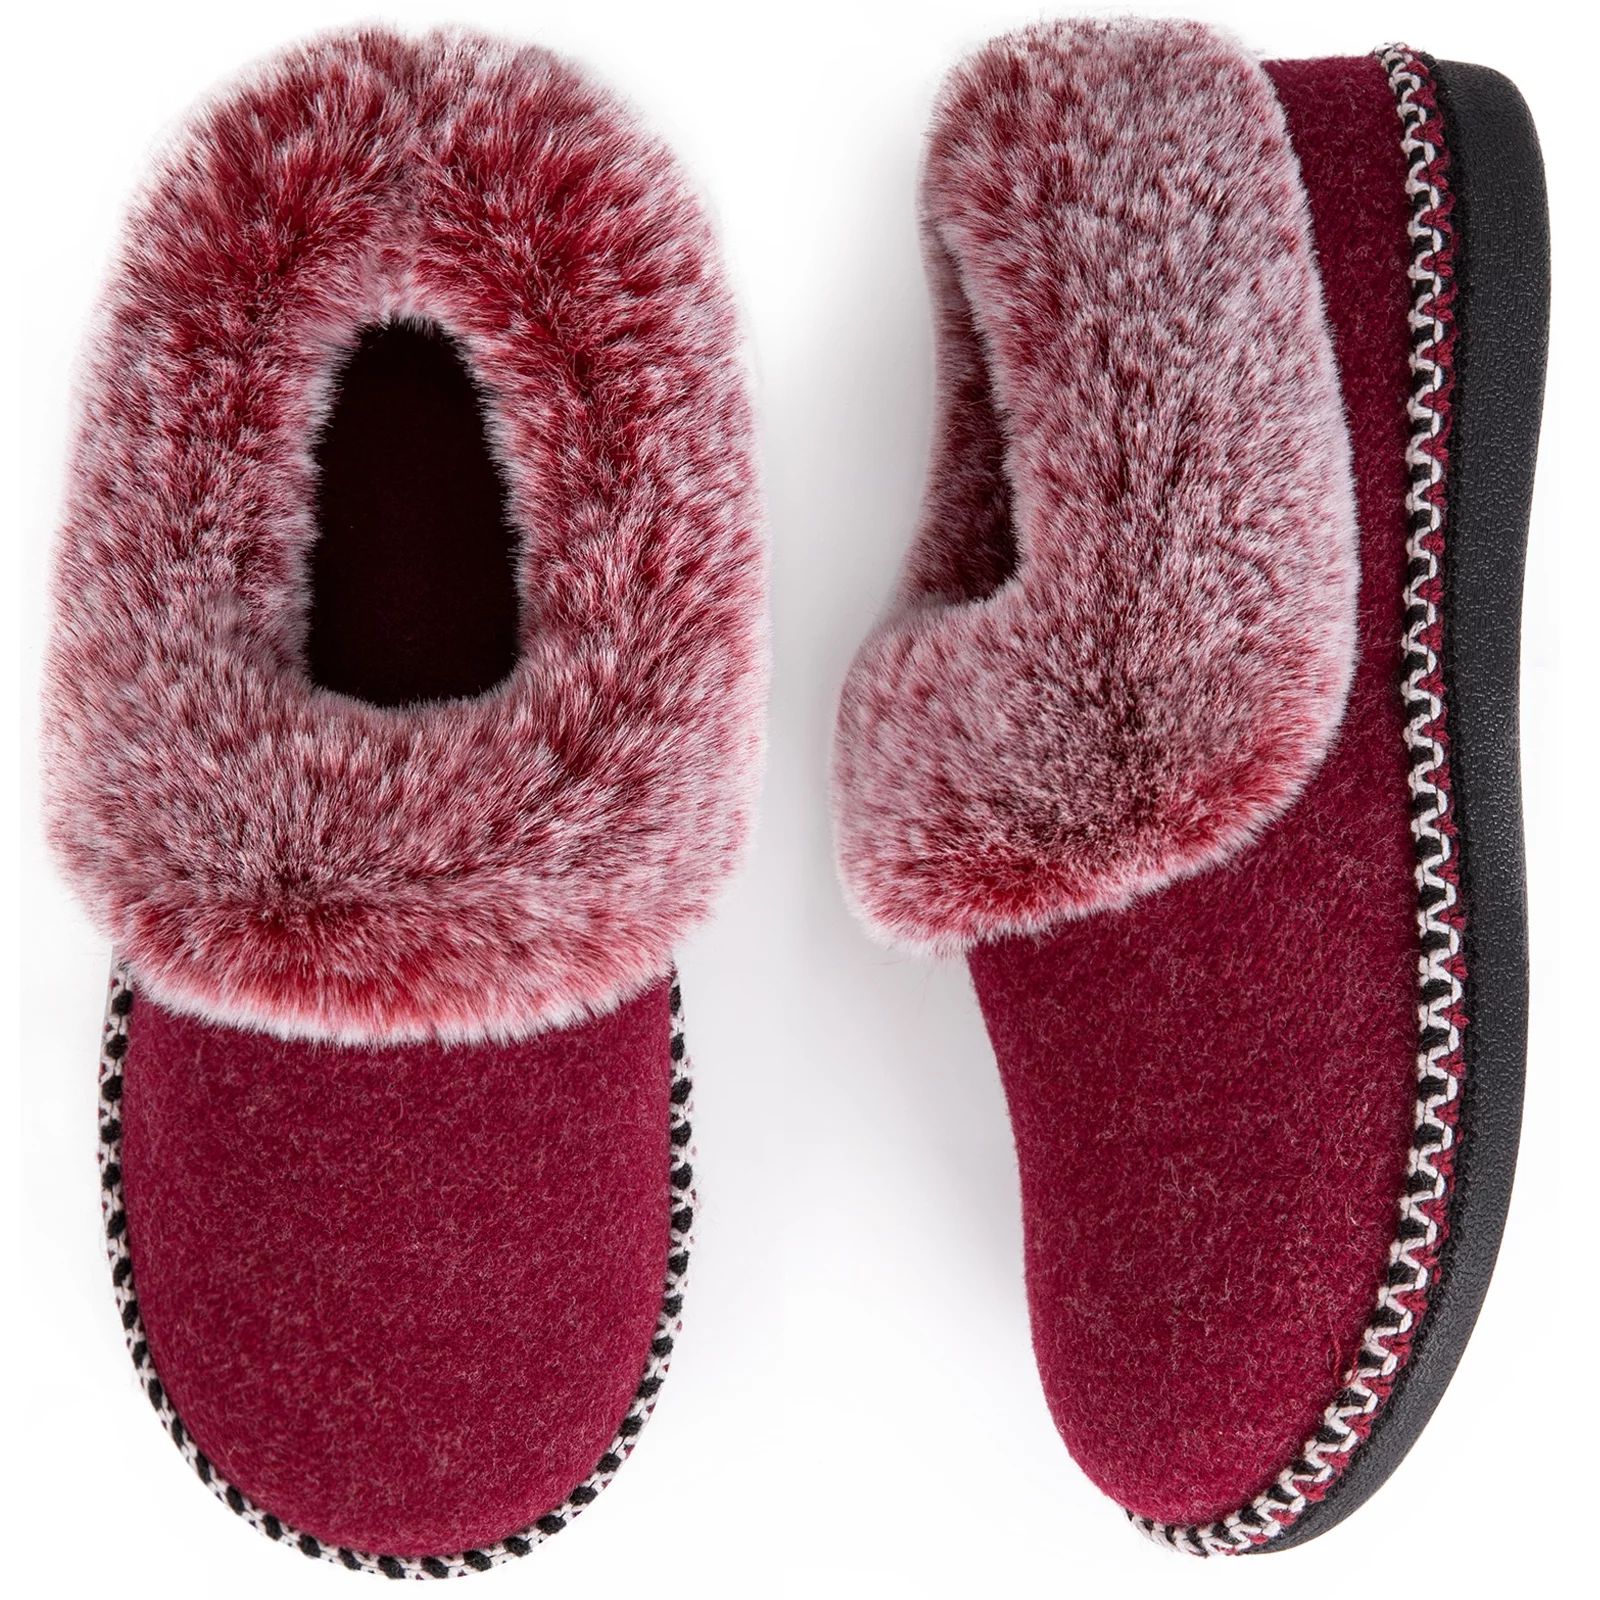 EverFoams Ladies' Luxury Wool Memory Foam Slippers with Fluffy Faux Fur Collar and Indoor Outdoor... | Walmart (US)